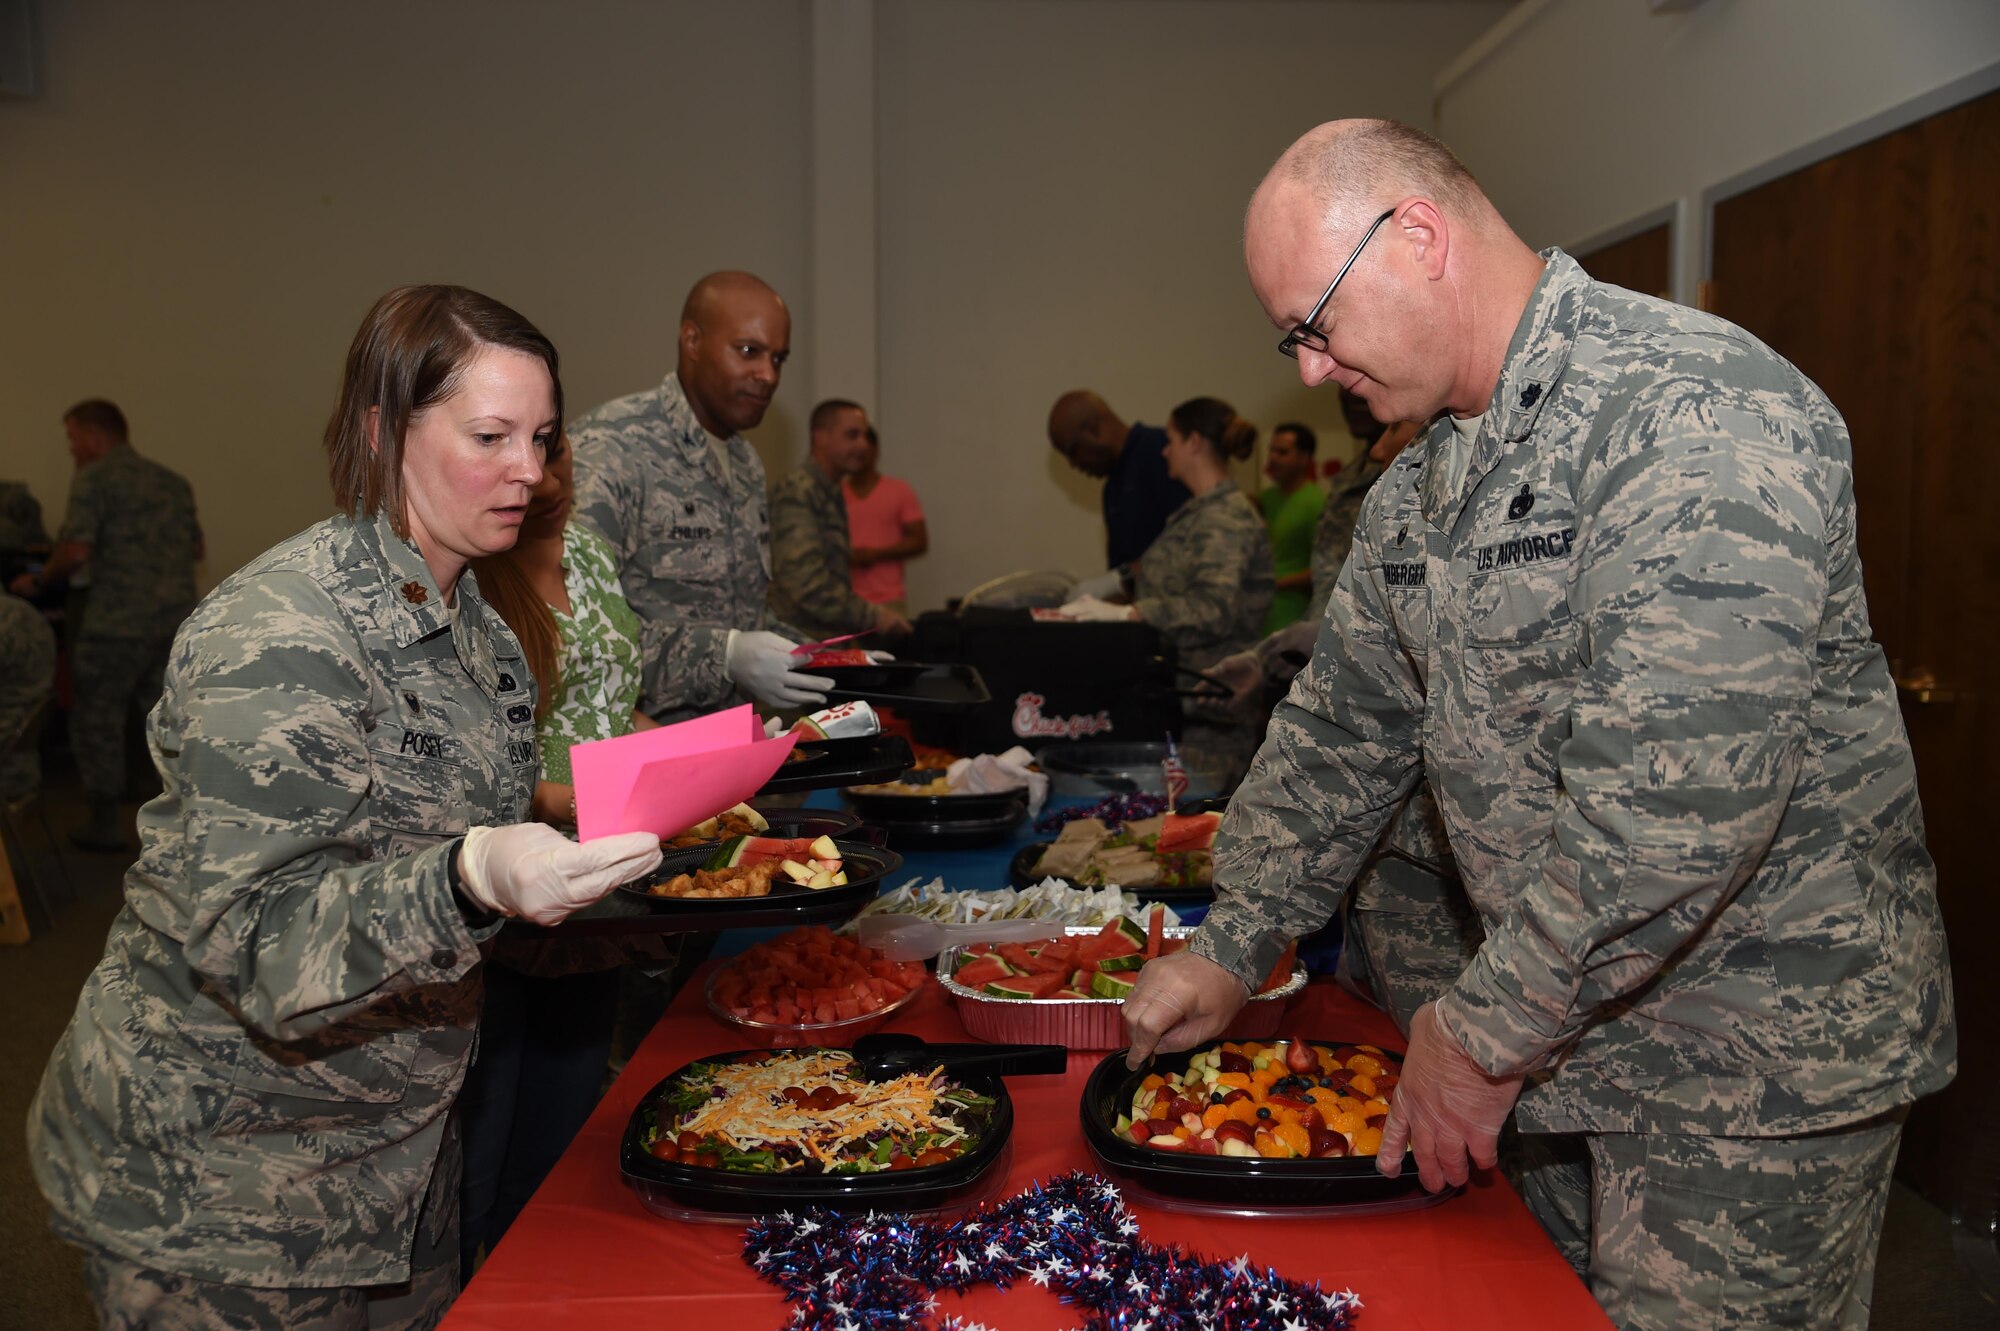 Team McChord Leadership fills menu orders at the Deployed Family Dinner August 15, 2016, at the Chapel Support Center, Joint Base Lewis-McChord, Wash. The dinner offered families of deployed members a chance to fellowship, win prizes and unwind. (U.S. Air Force photo/Staff Sgt. Naomi Shipley)